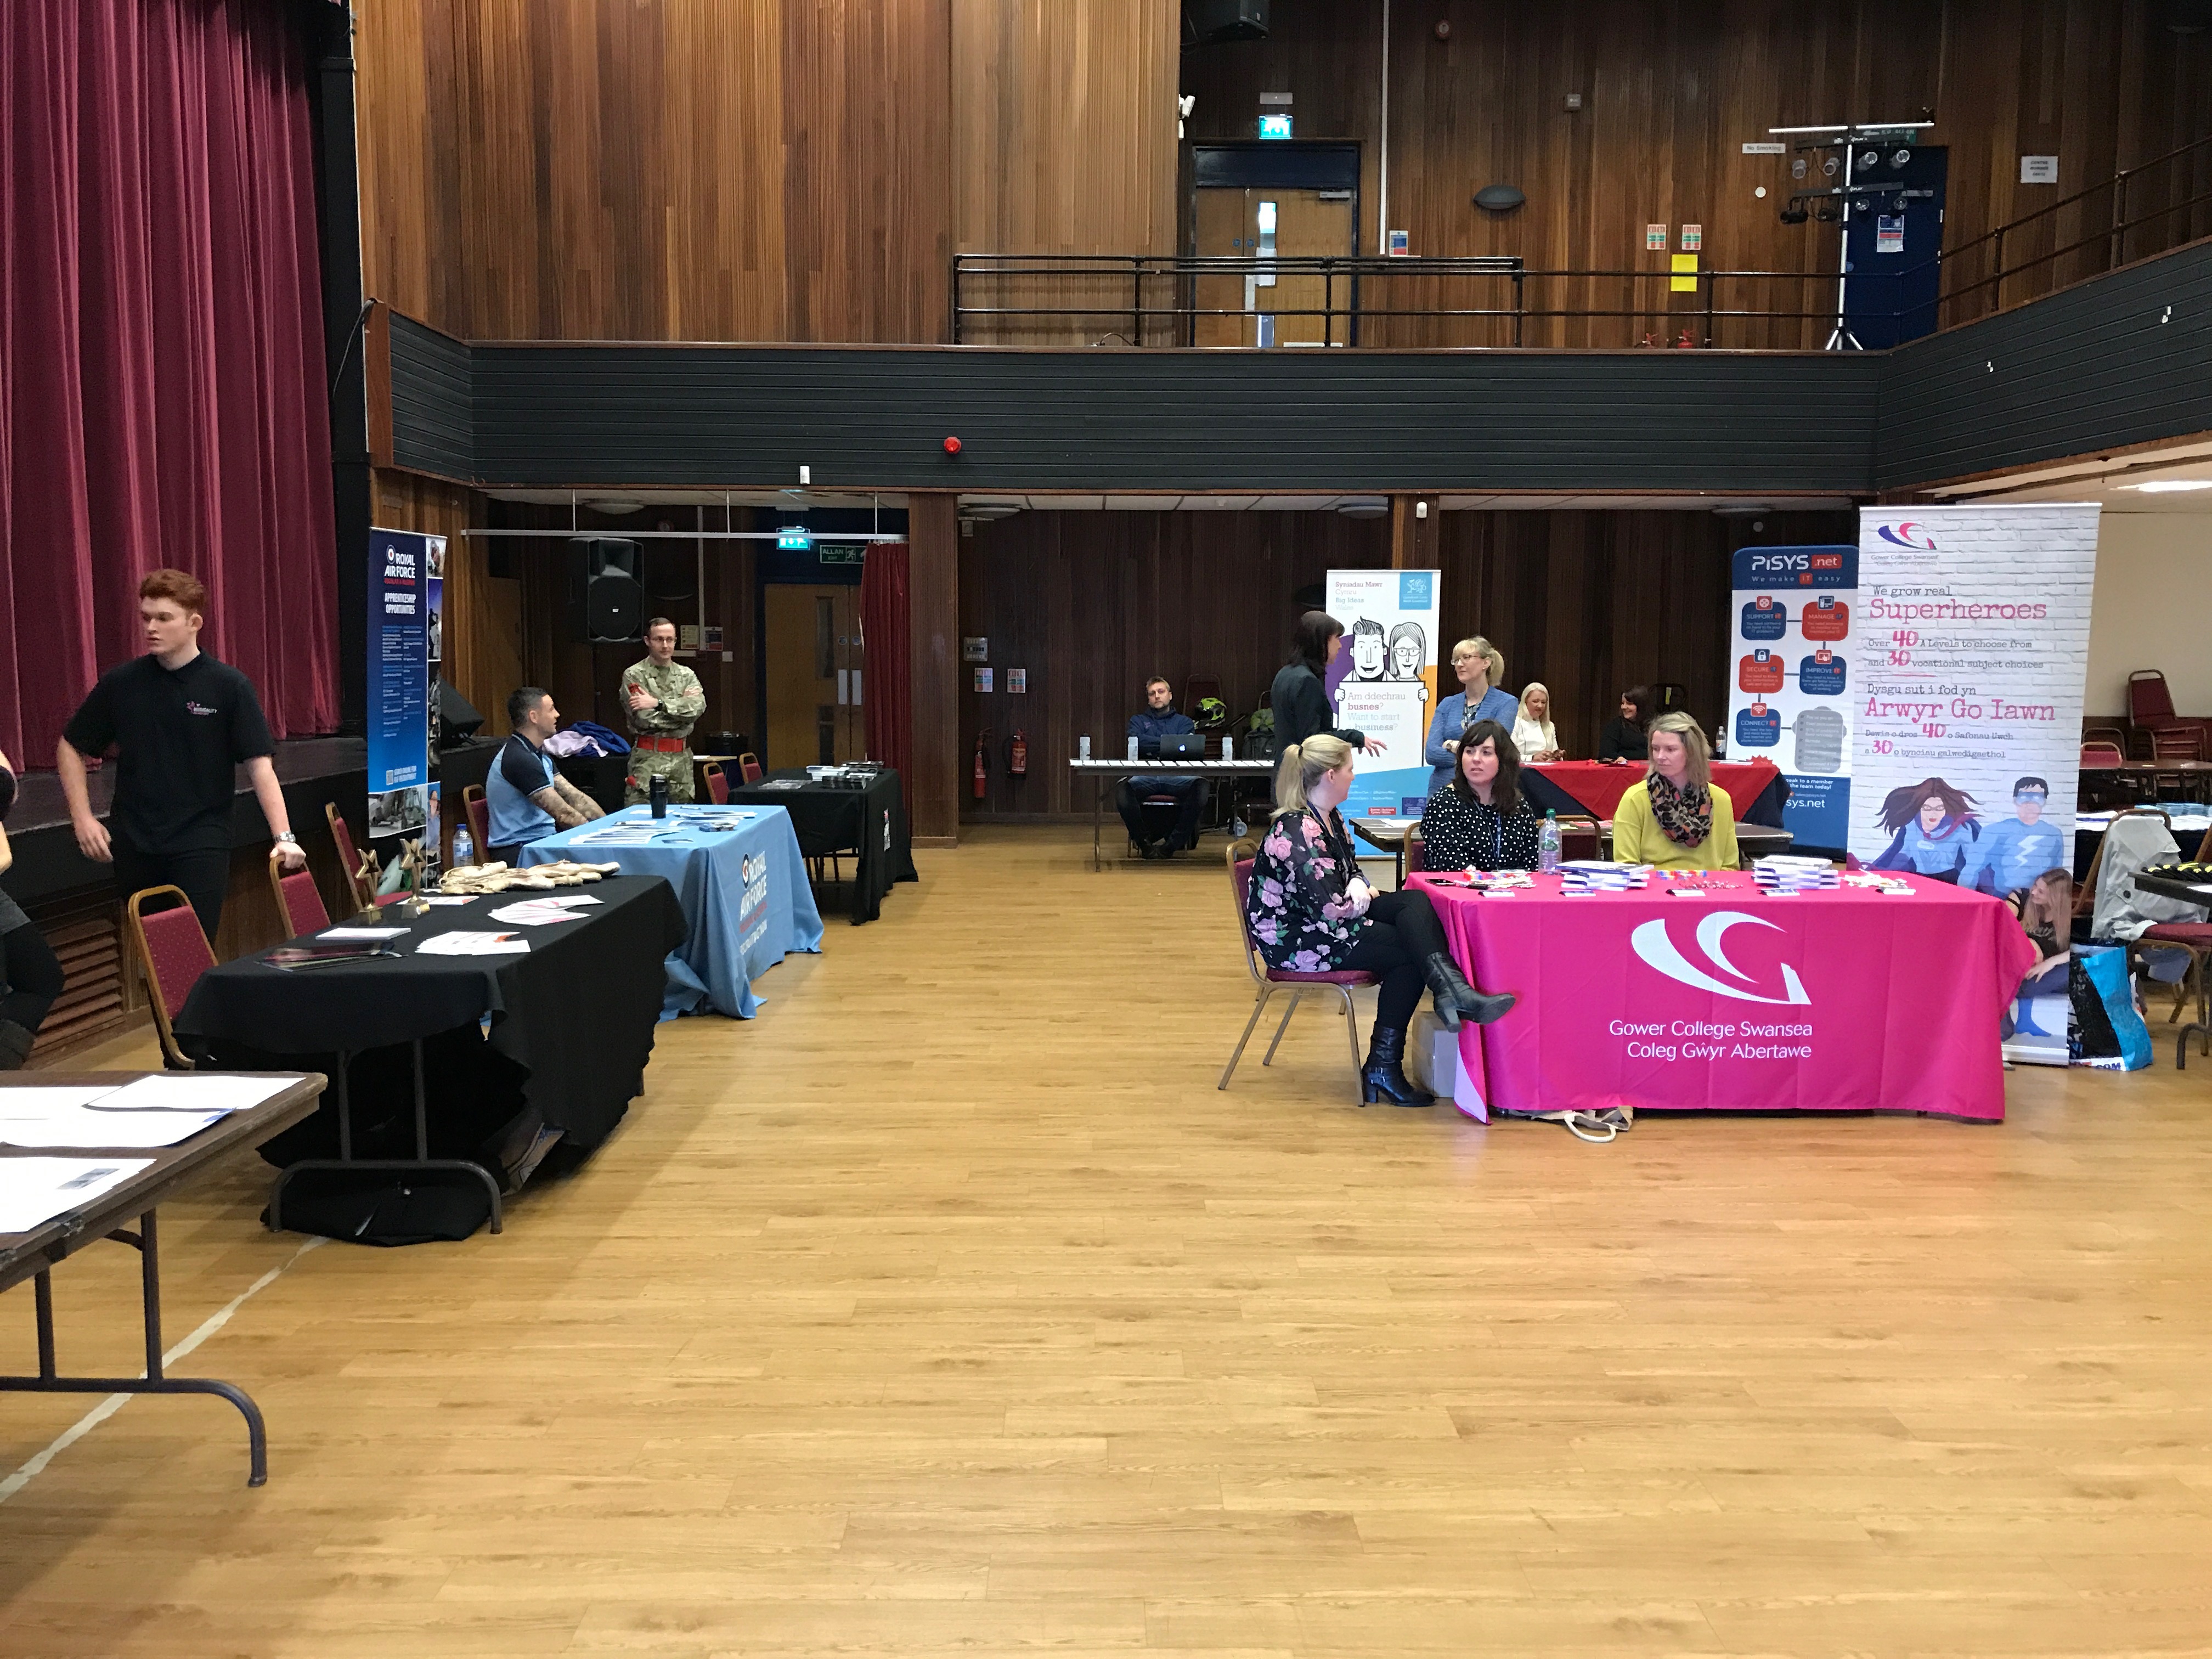 An image taken from Penyrheol Comprehensive School's Careers Fair. Image includes stalls from Gower College and other local businesses.